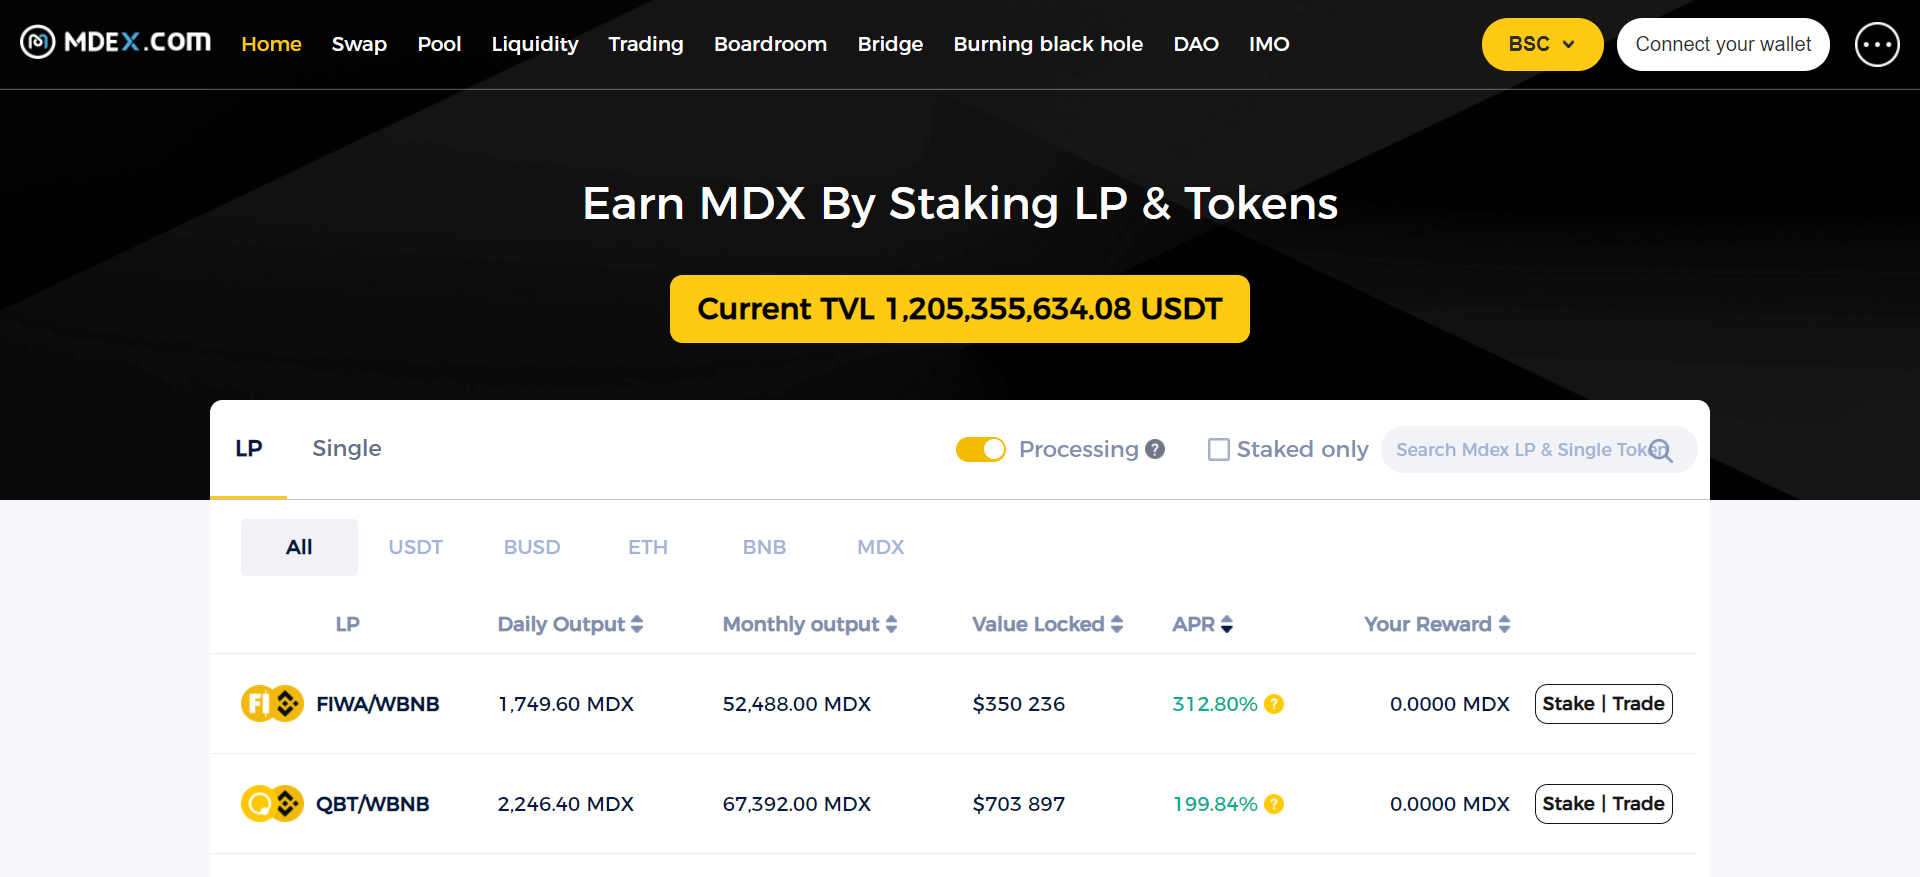 MDEX launched multiple liquidity programs 